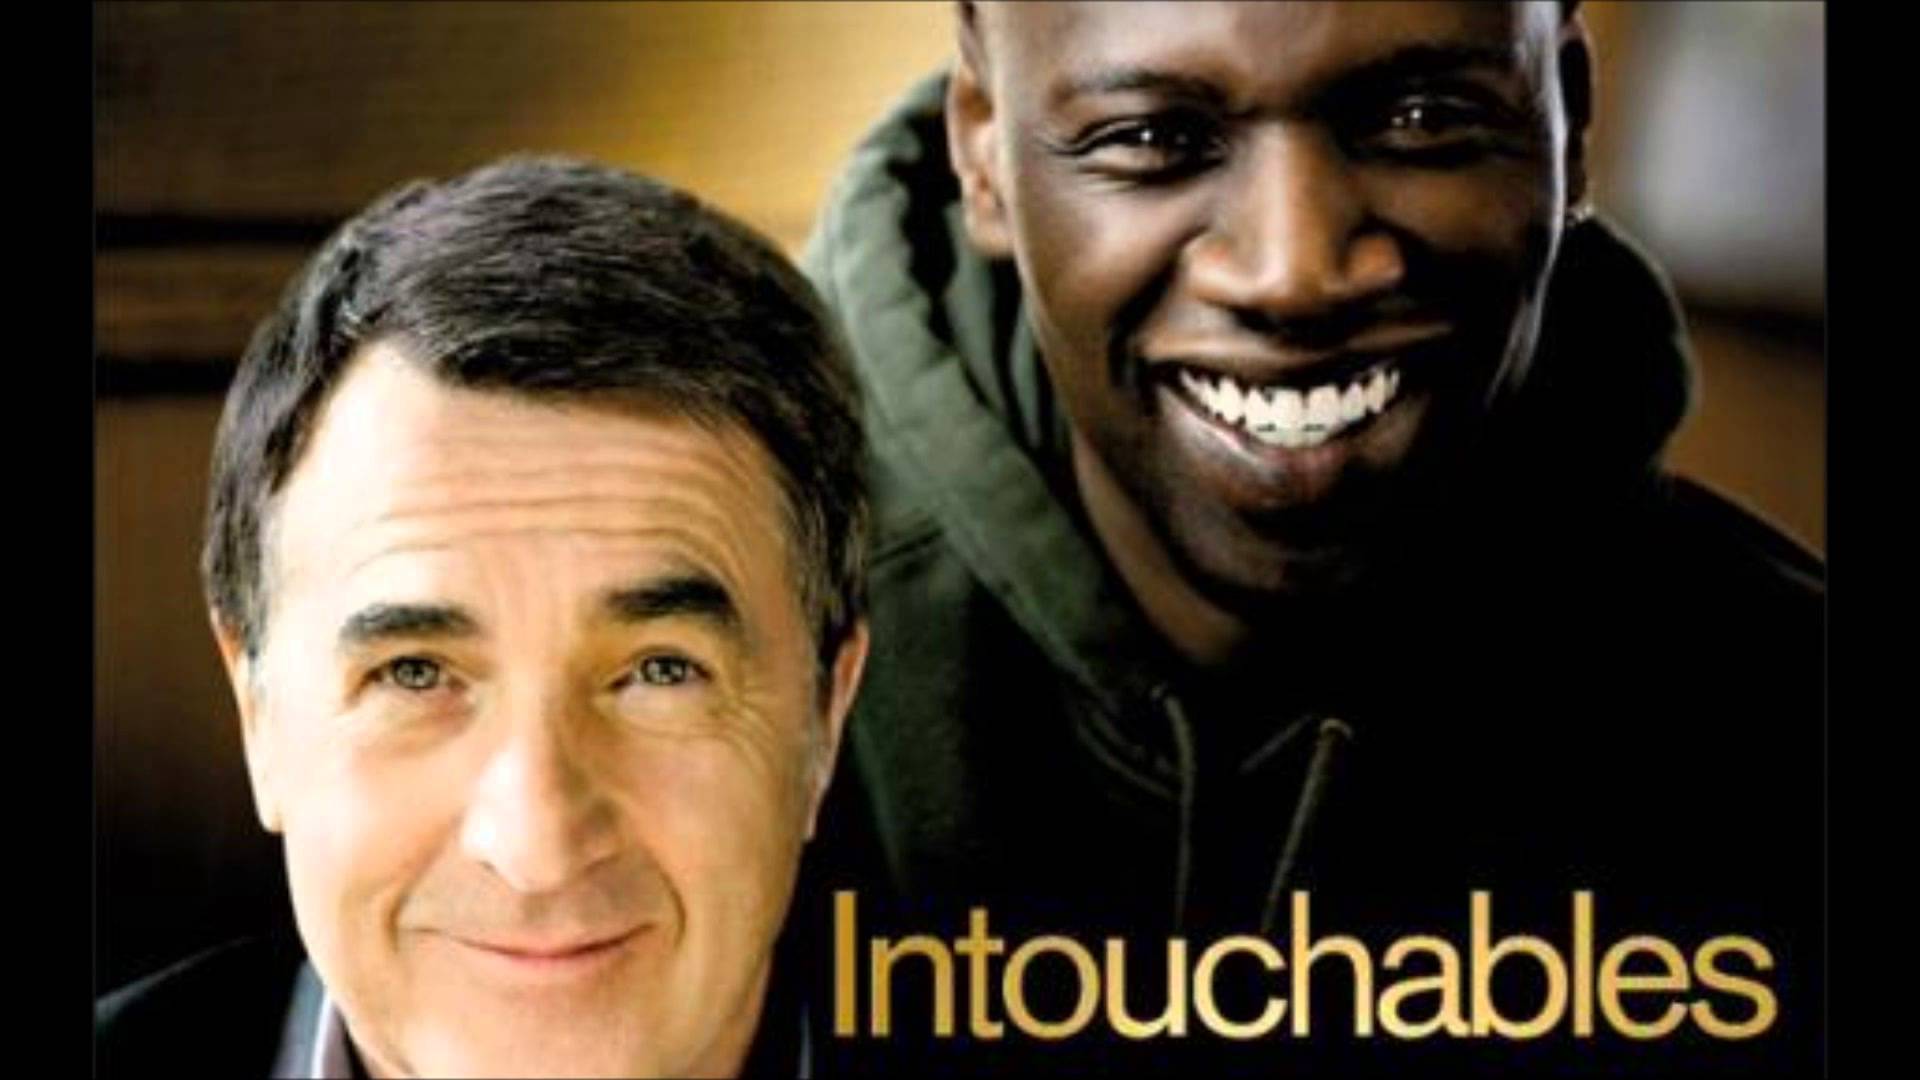 Intouchables Wallpaper Image Group